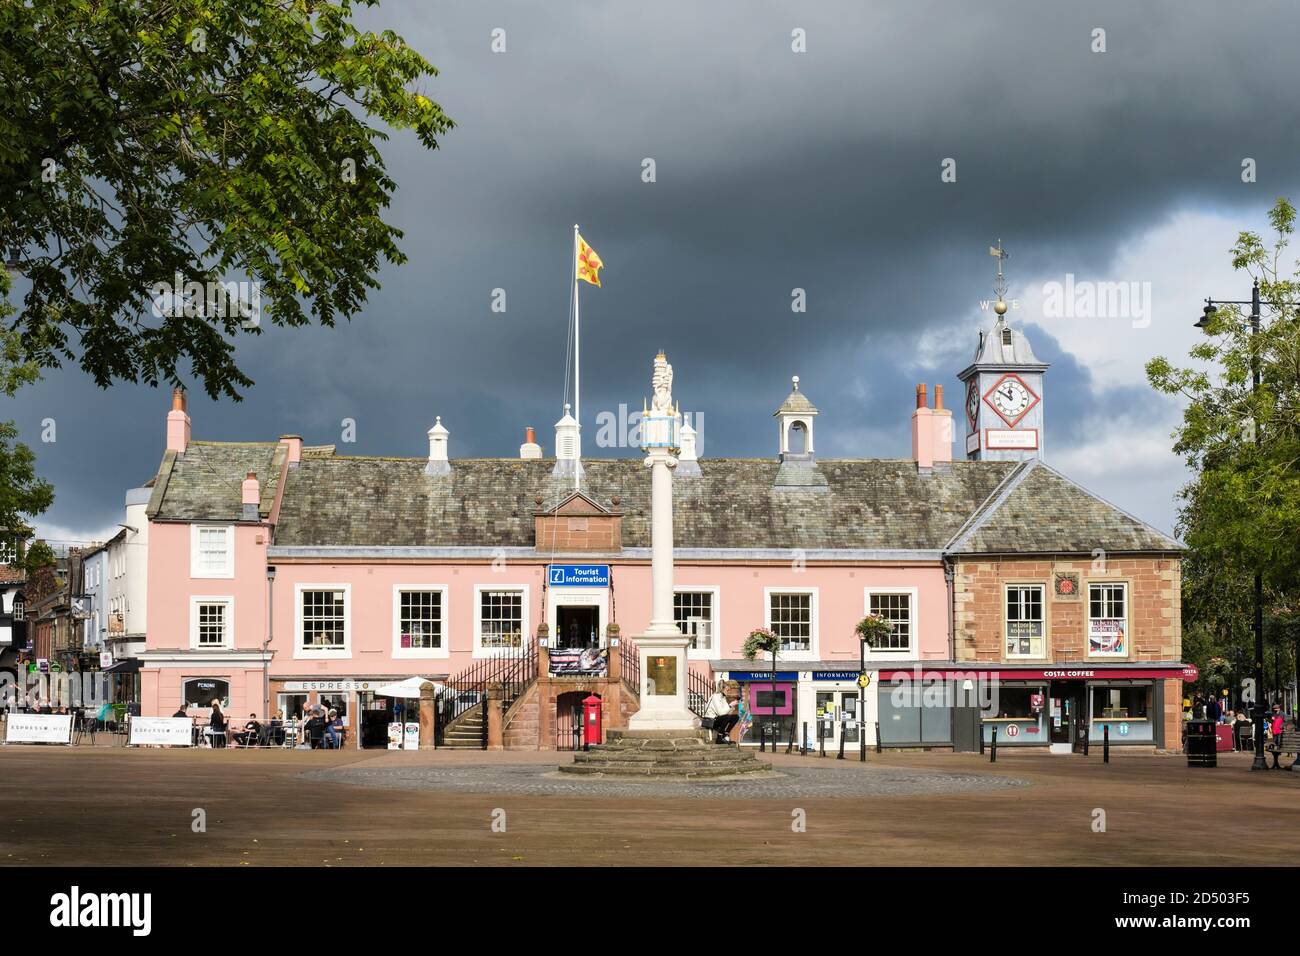 Old Town Hall pink building with people sitting outside cafes in pedestrianised city centre. Market Square, Carlisle, Cumbria, England, UK, Britain Stock Photo